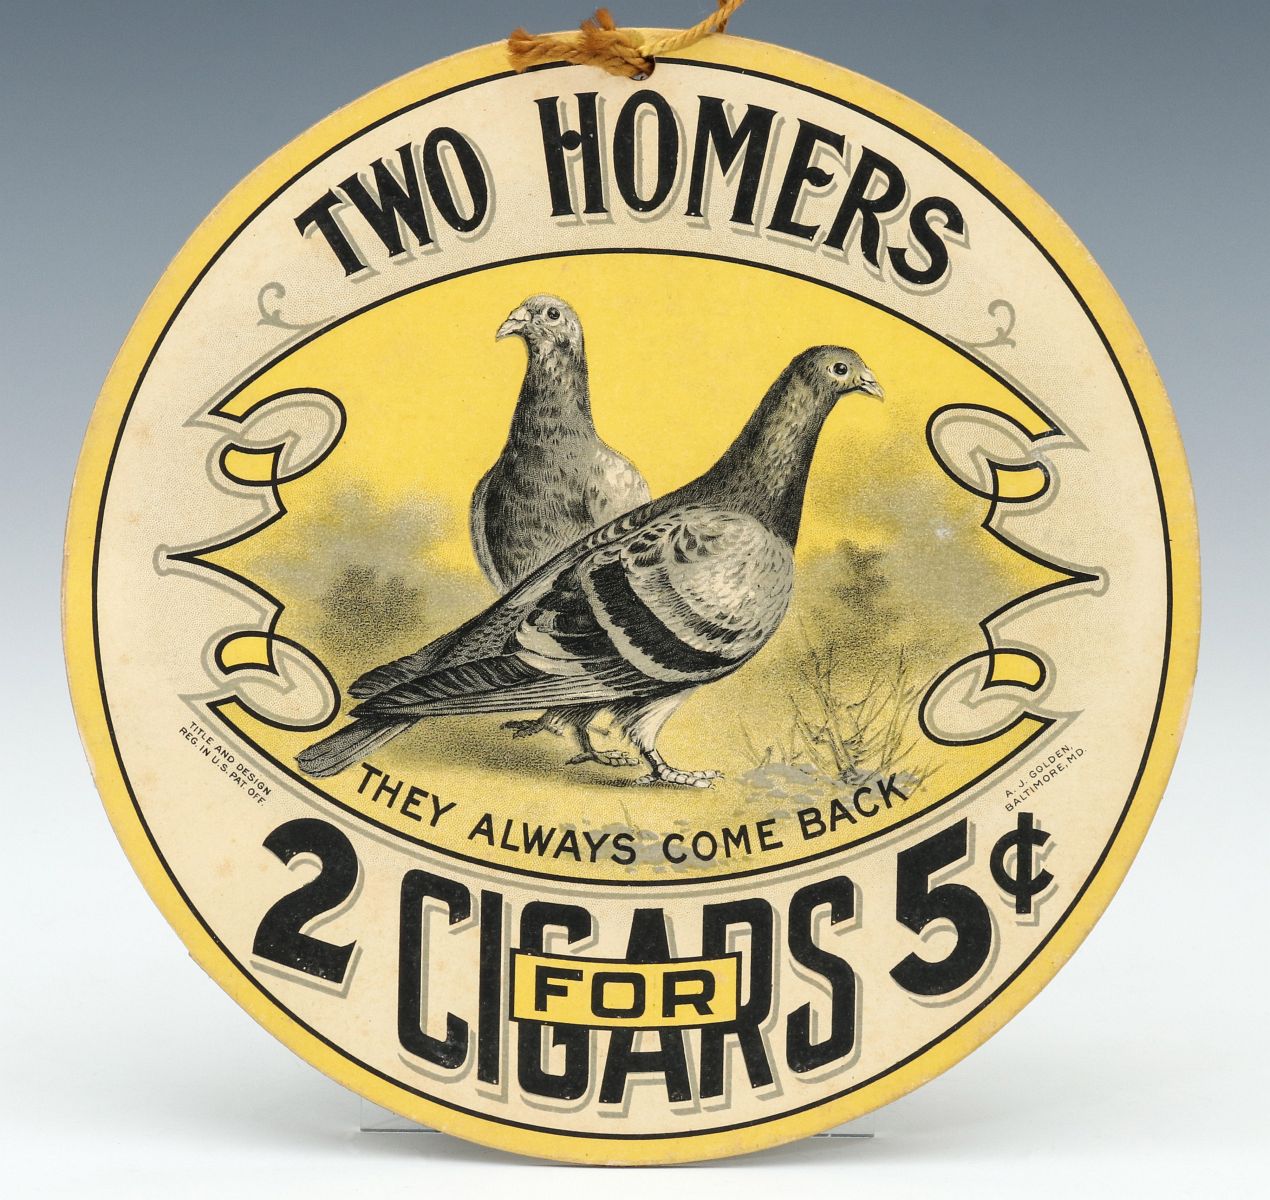 A TWO HOMERS 5Â¢ CIGARS ADVERTISING SIGN C 1920